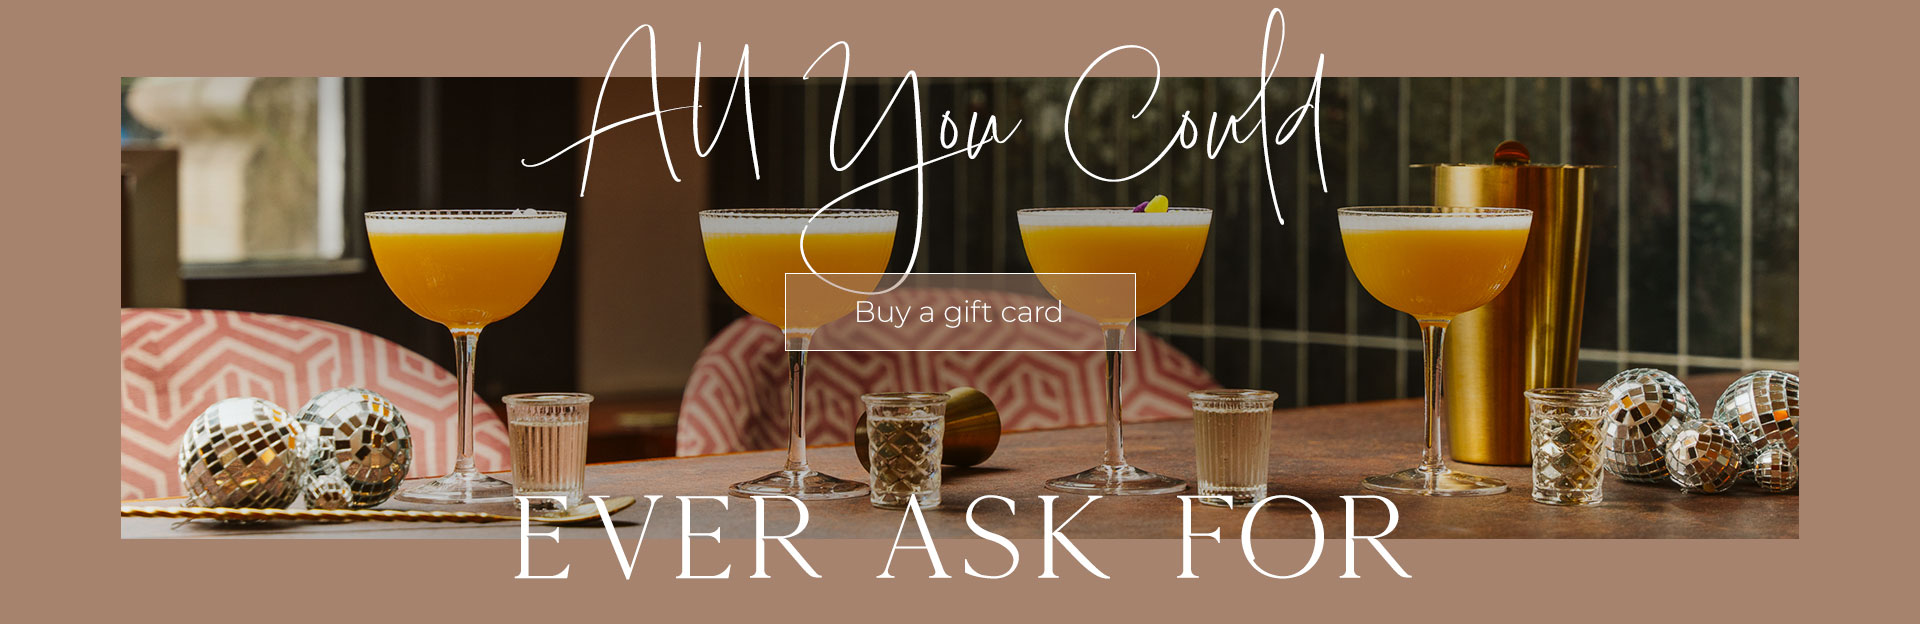 All Bar One Gift Cards at All Bar One Windsor